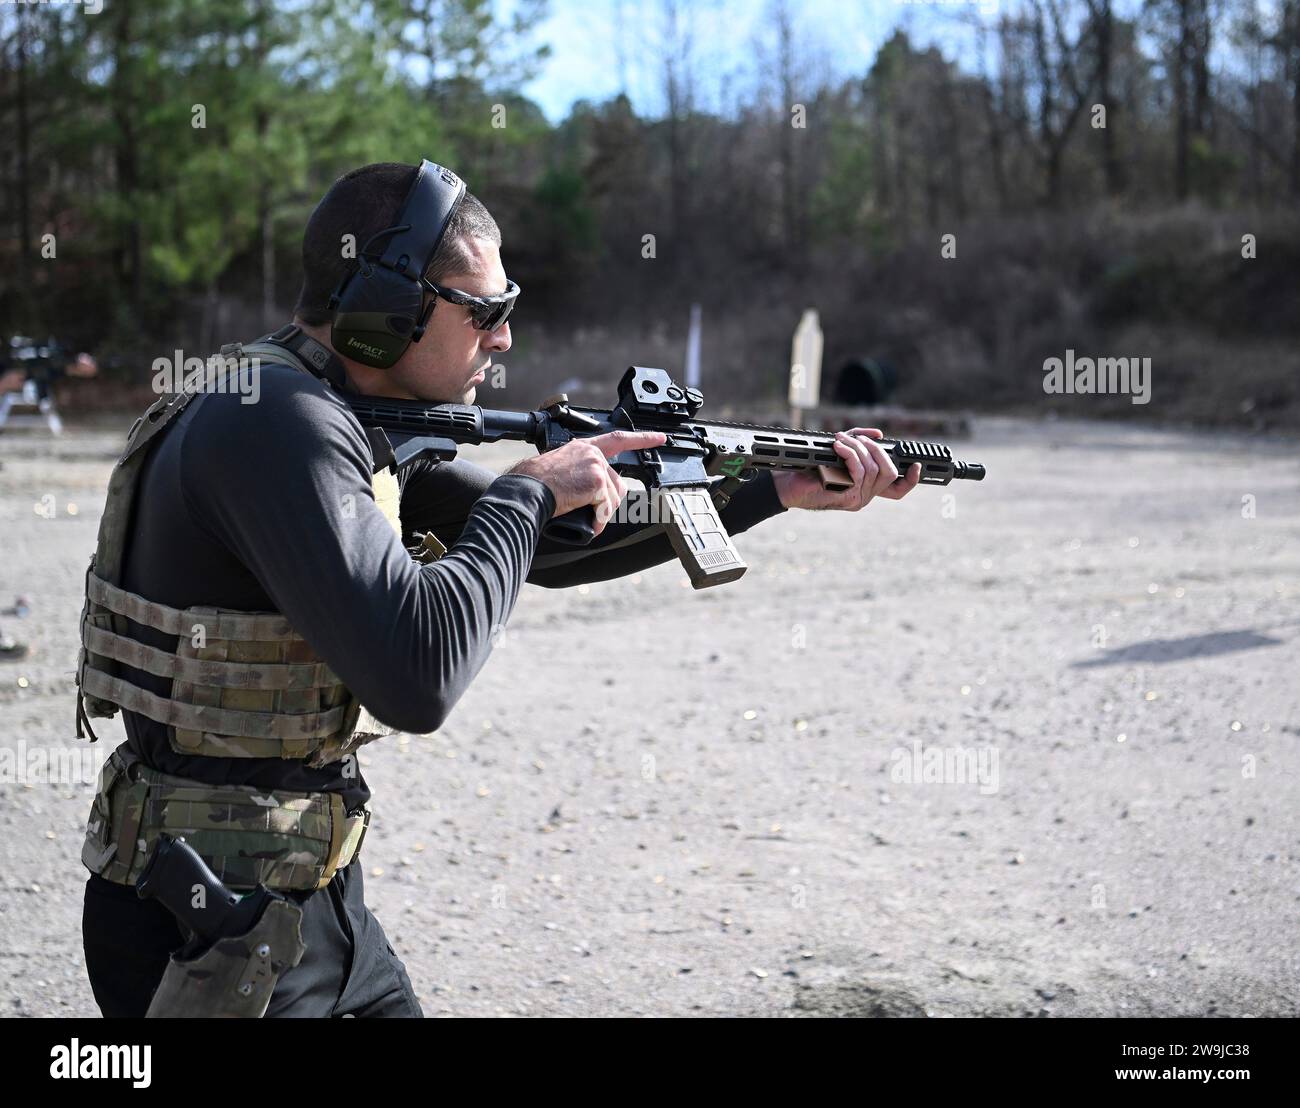 Fayetteville, United States of America. 13 December, 2023. Mixed Martial Artist Khonry Gracie, fires a rifle during practice prior to participating in the 2023 Green Beret Celebrity Tactical Challenge at the U.S. Army John F. Kennedy Special Warfare Center Miller Training Complex of Fort Liberty, December 13, 2023 Fayetteville, North Carolina. Fourteen celebrities teamed up with Green Berets to take part in the annual shooting event.  Credit: K. Kassens/US Army Photo/Alamy Live News Stock Photo